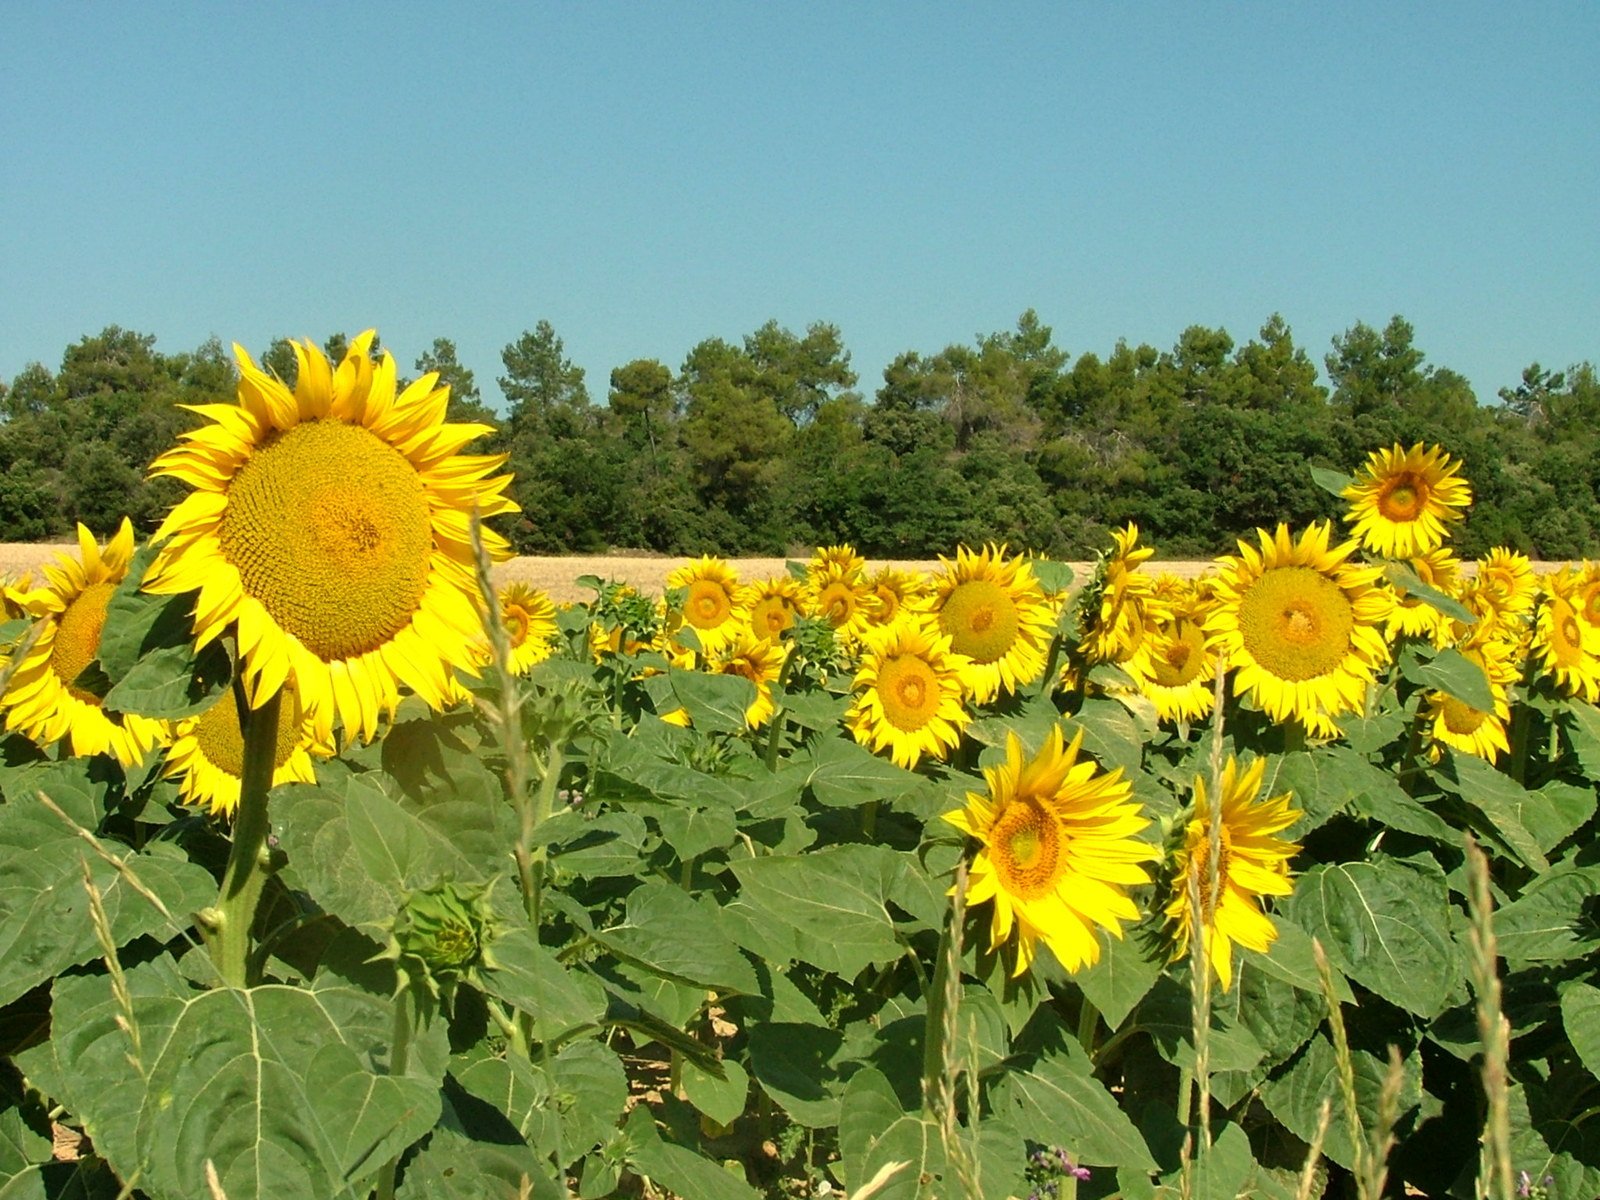 sunflowers are blooming in a field with blue skies